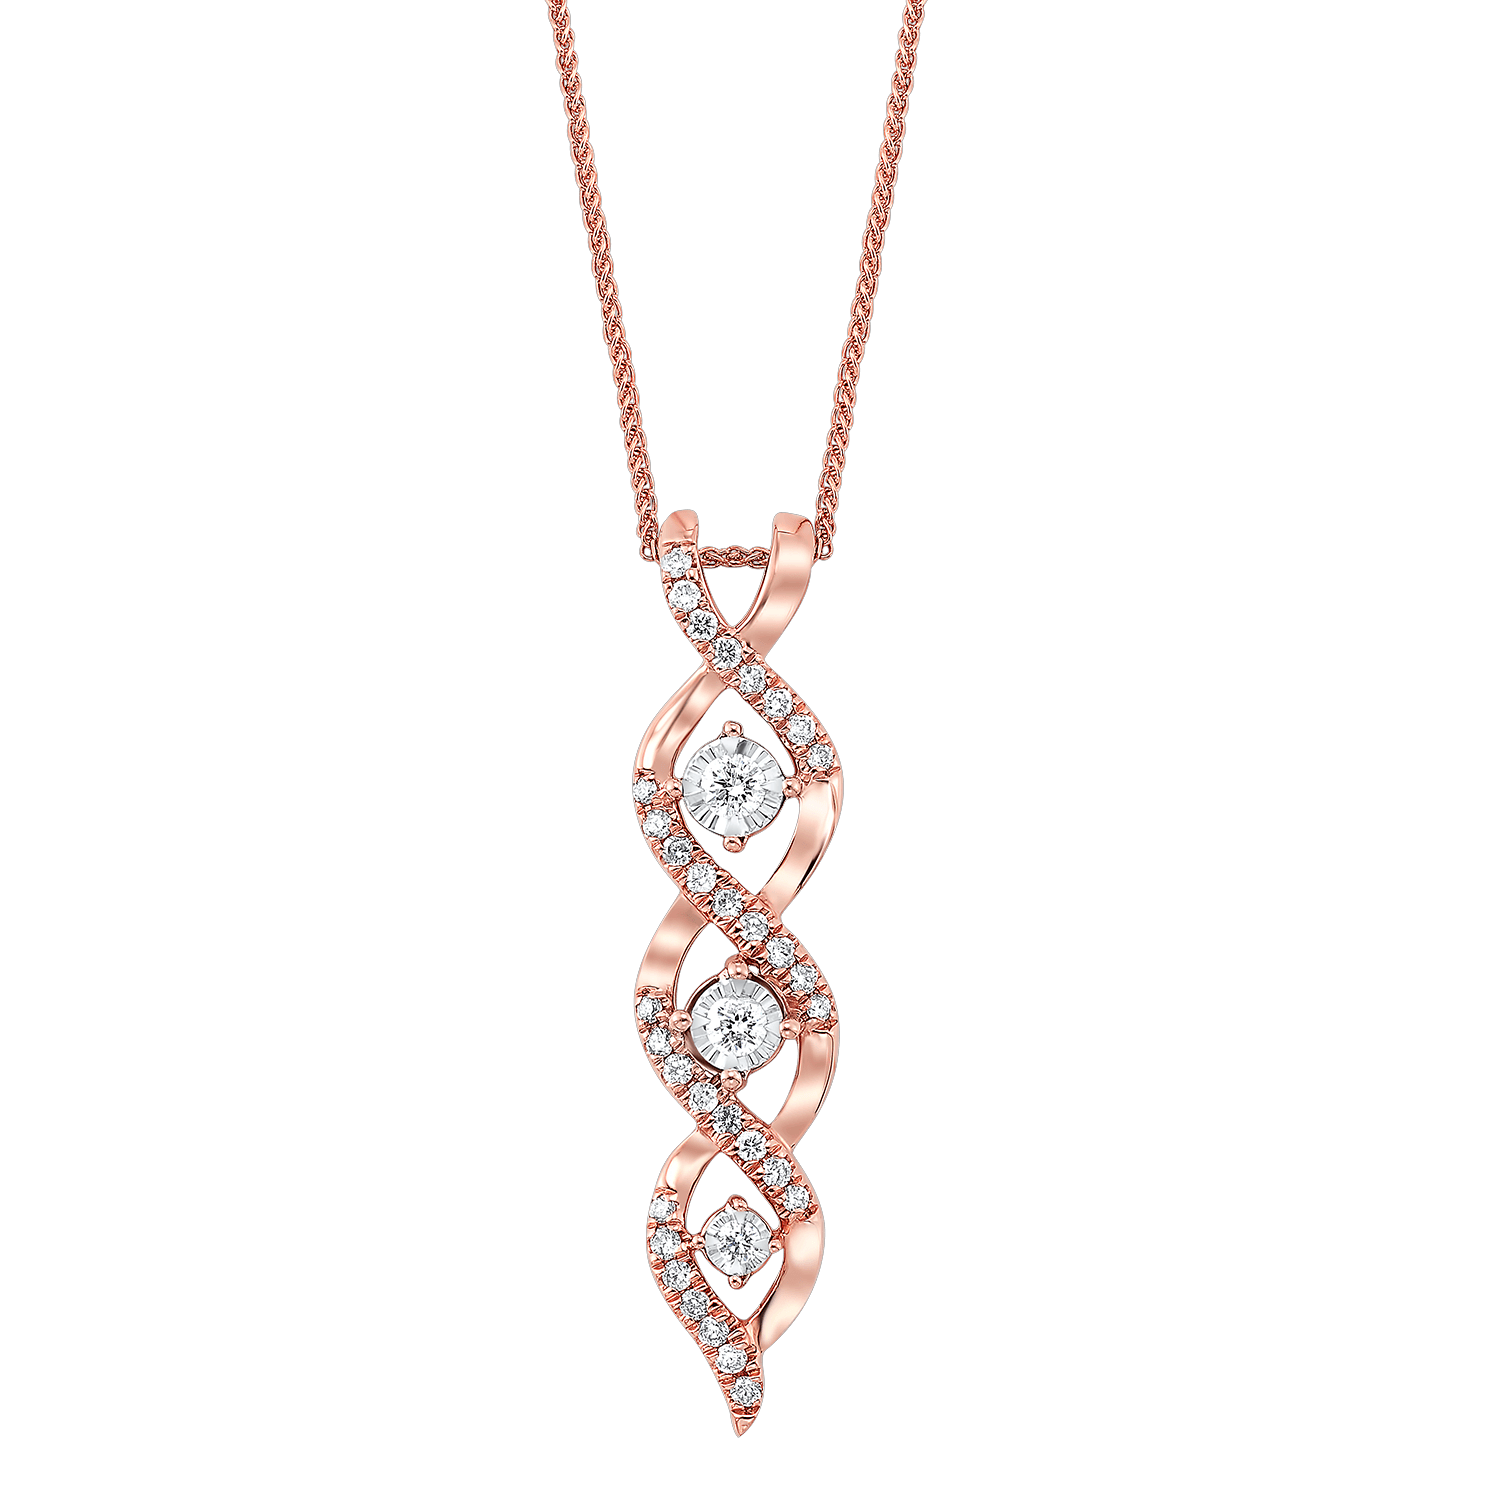 BW James Jewelers Necklace 16 Page Christmas Catalog Offer 14KT Diamond Necklace 1/3ctw